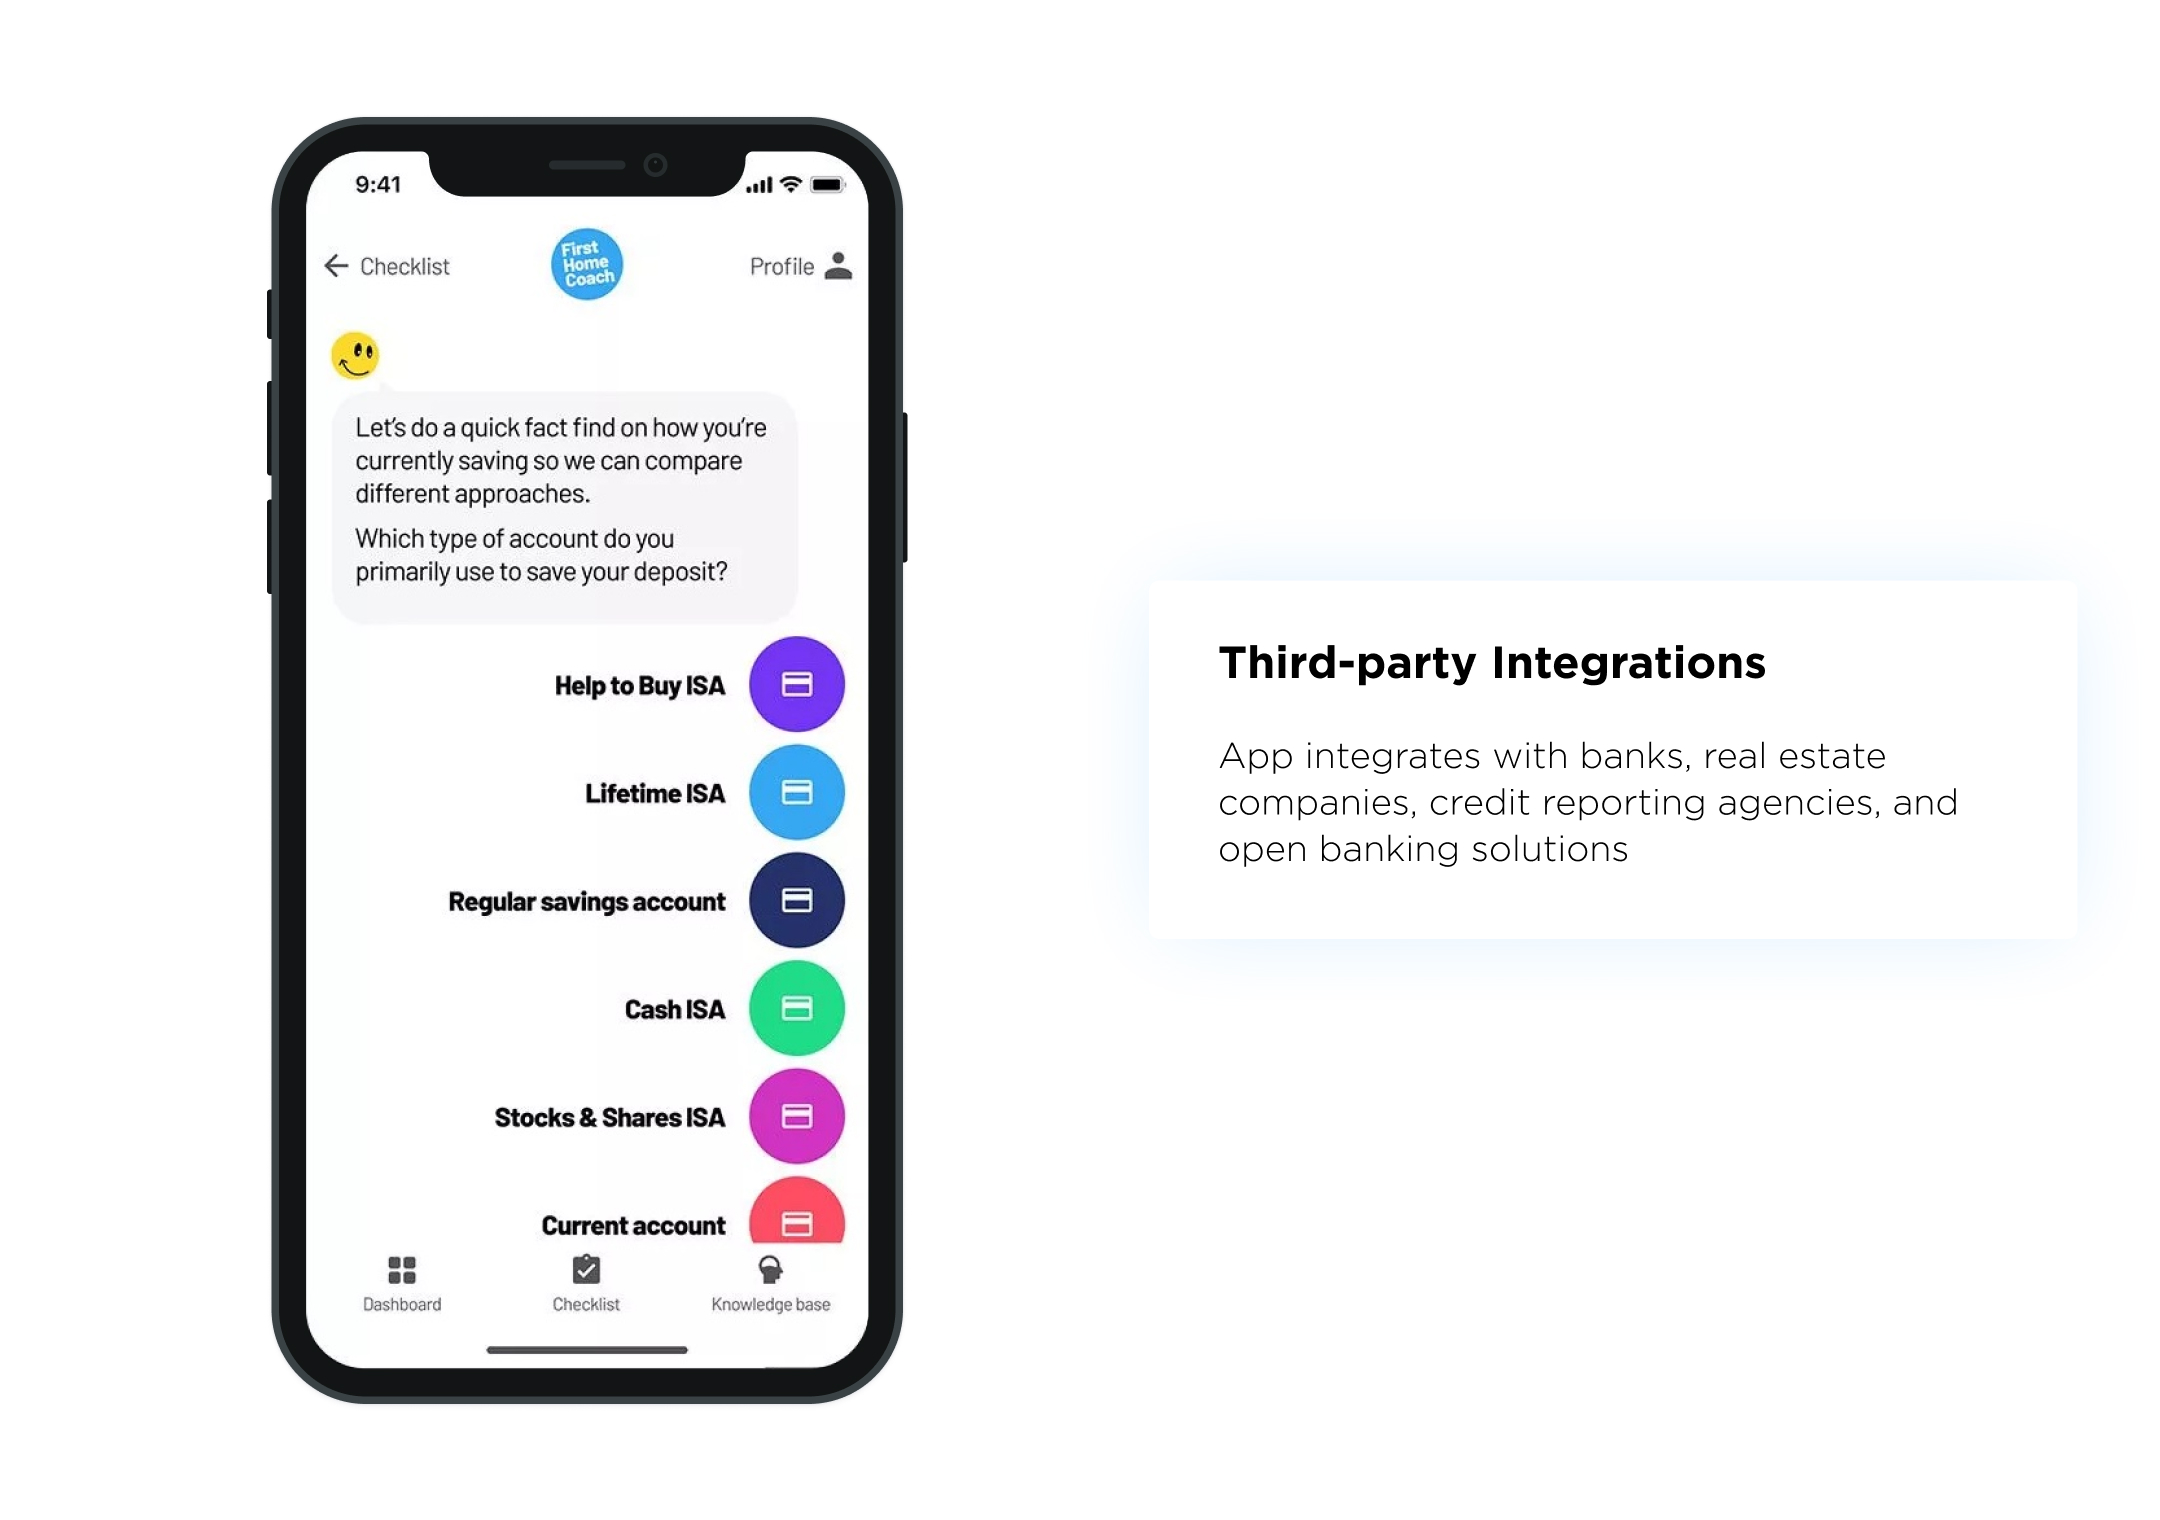 white label app with third-party integrations